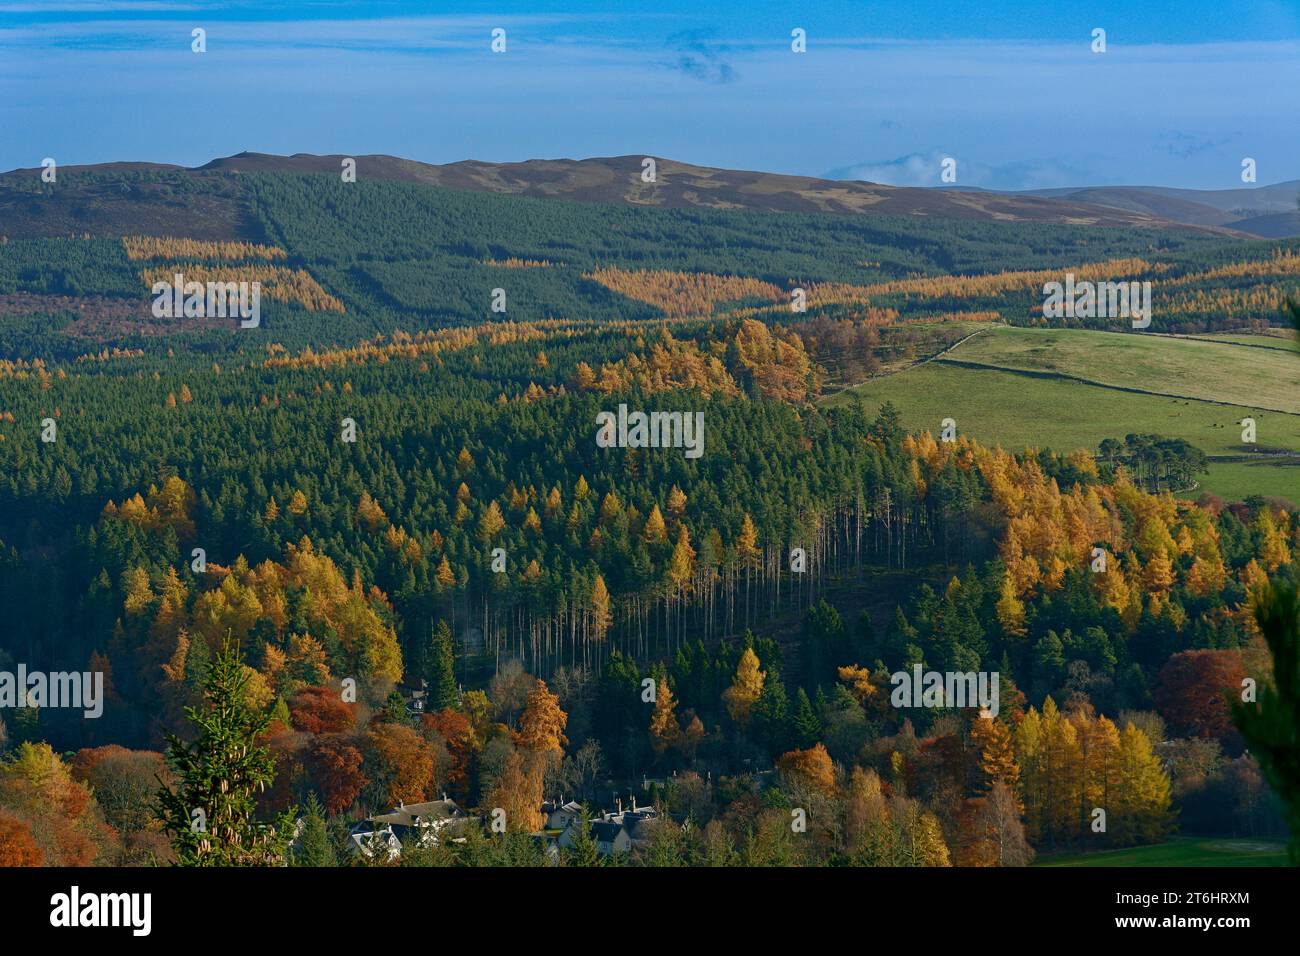 Balmoral Estates Crathie Scotland looking down the valley to estate houses with autumnal colours in the trees and leaves Stock Photo